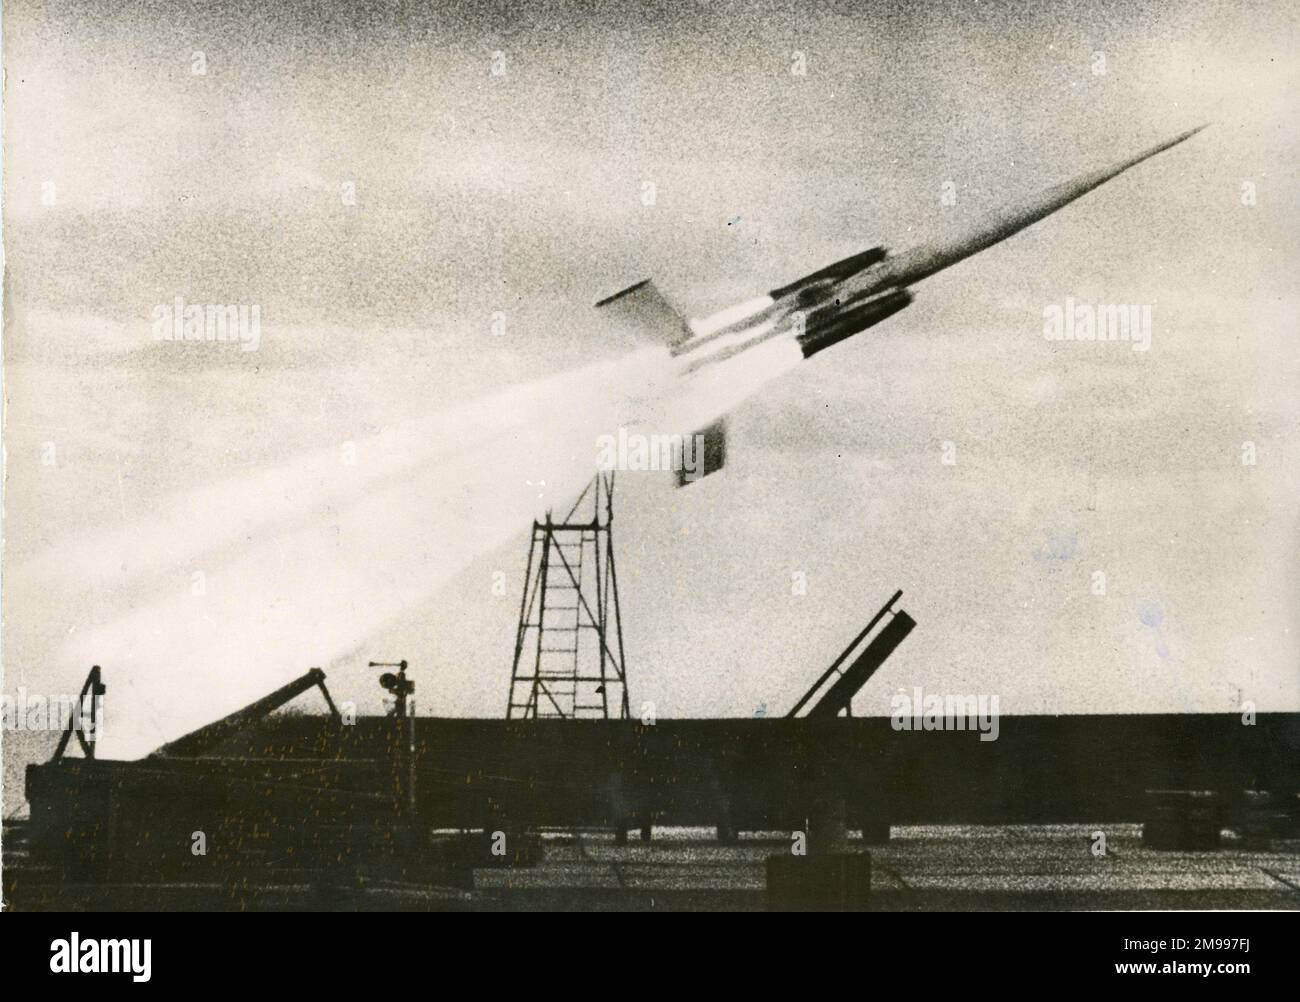 Bristol Bobbin recoverable ramjet test vehicle during launch. Stock Photo